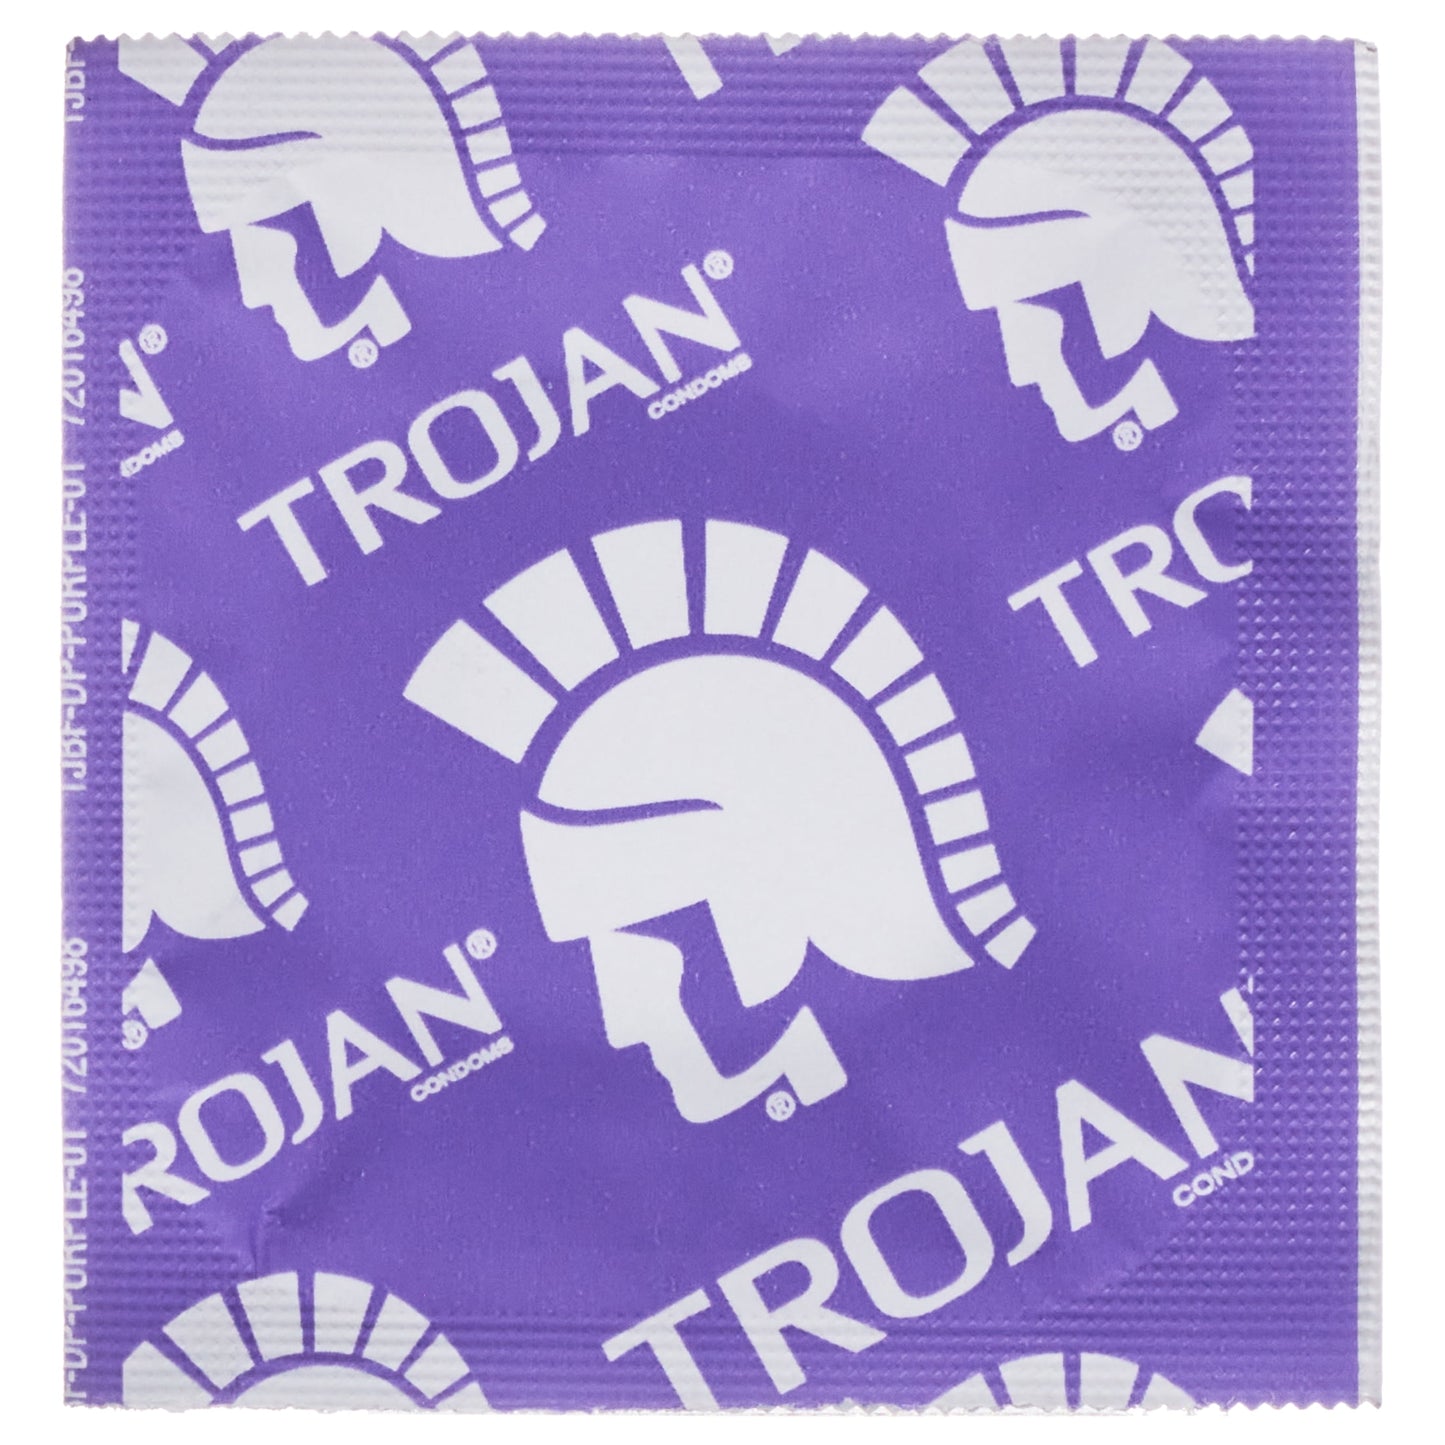 TROJAN EXTENDED PLEASURE Climax Control Extended Pleasure Lubricated Condoms, 12 Count